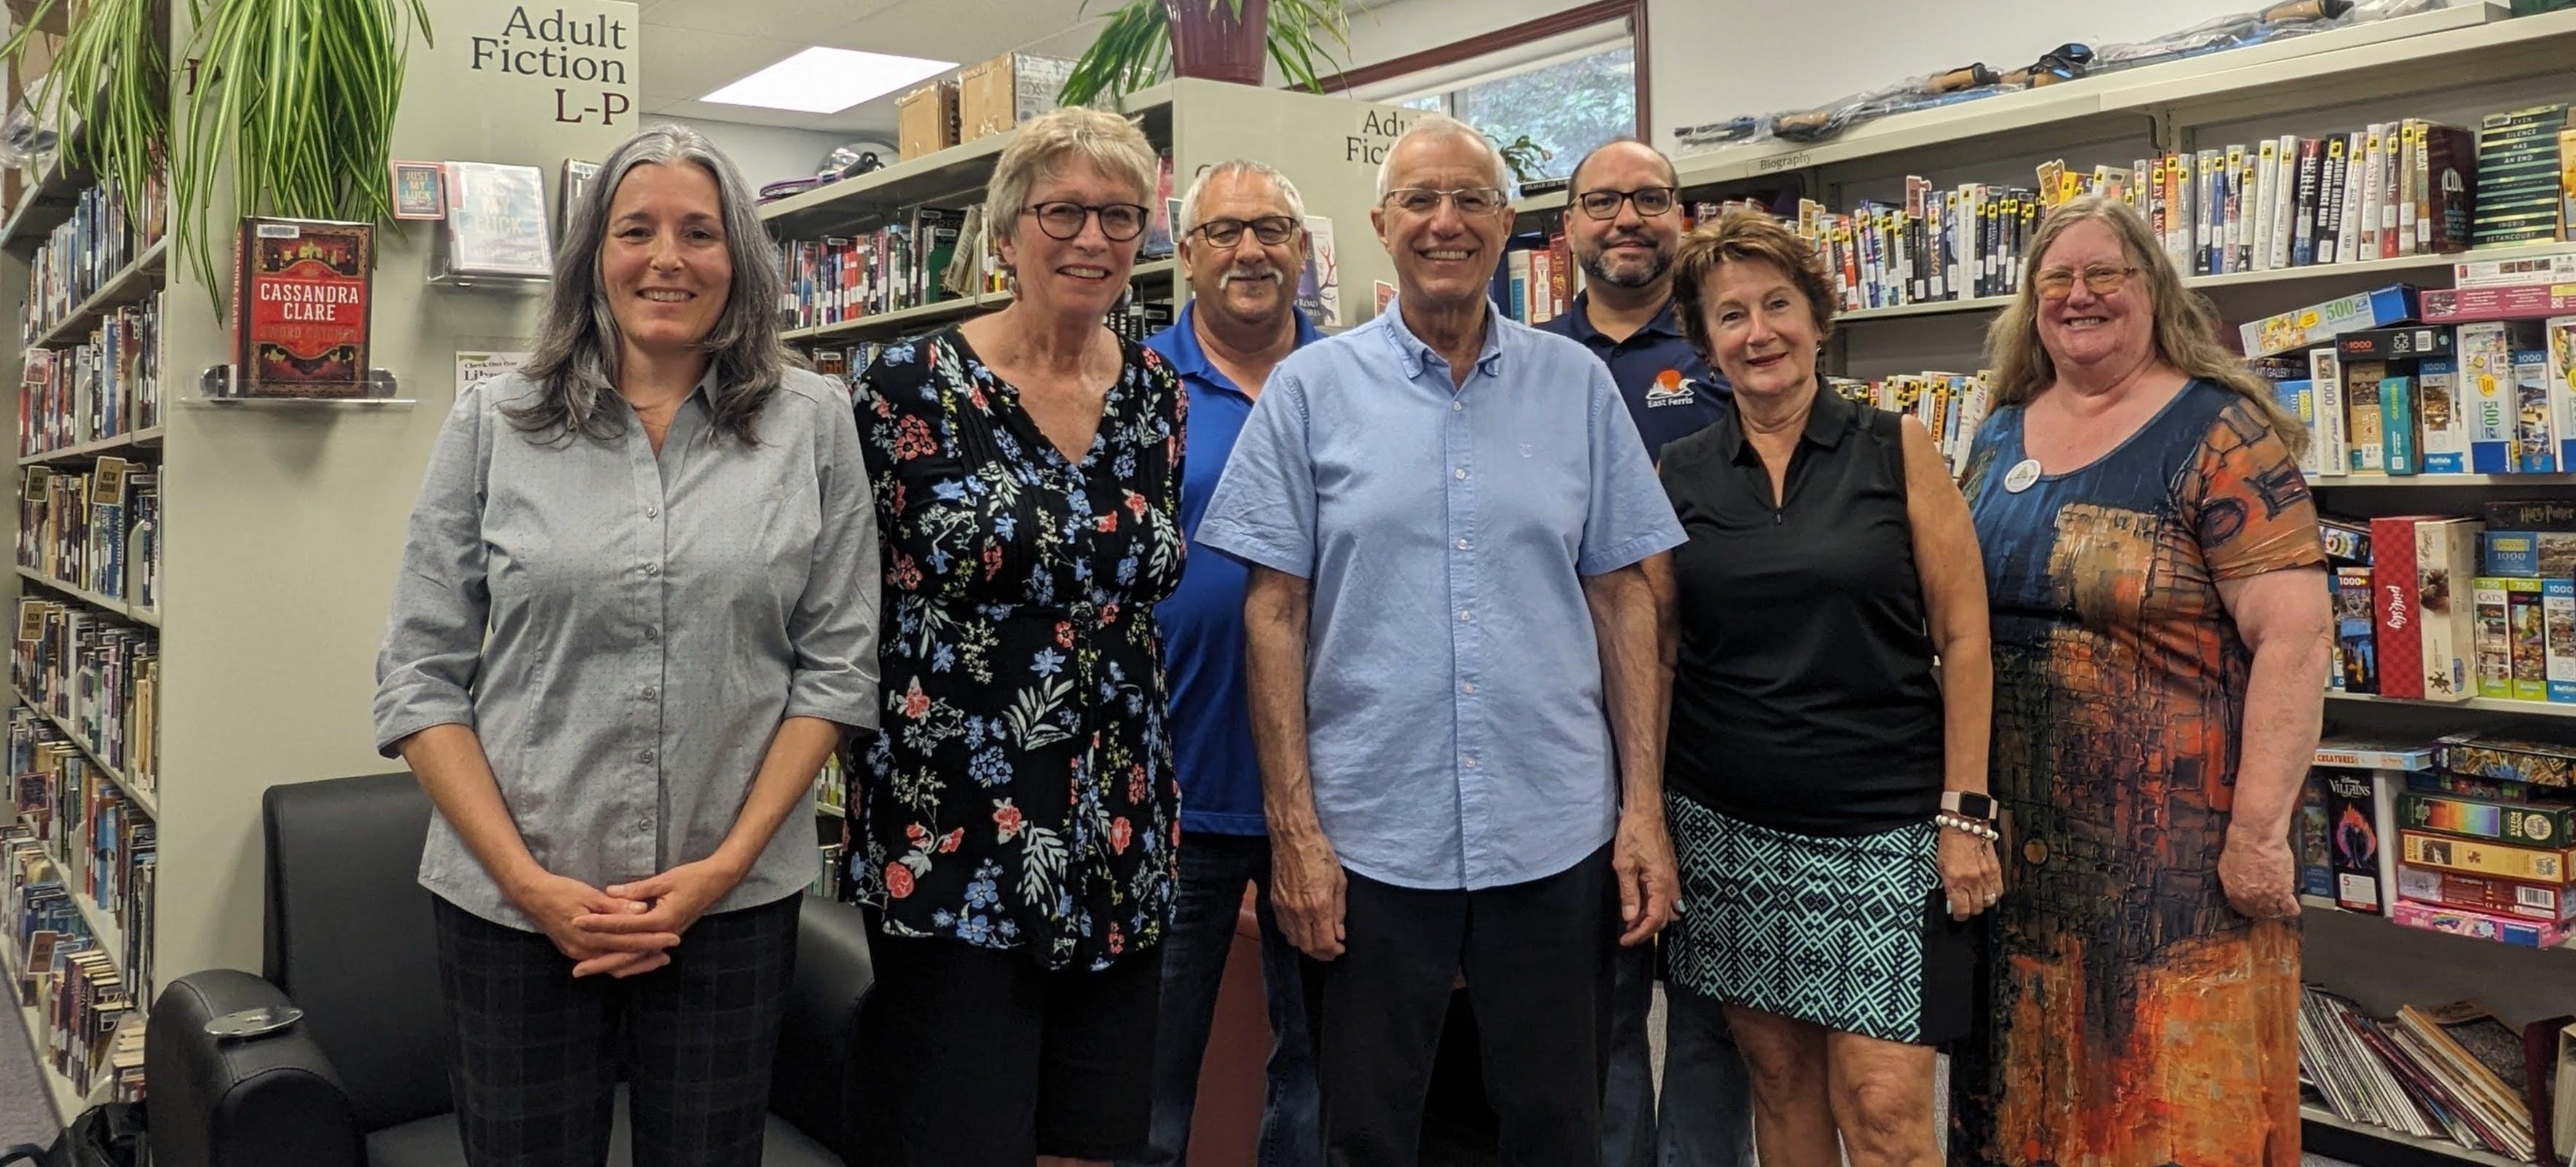 From left to right: East Ferris Public Library CEO Jennifer Laporte, Library Board member Christine Joly, Councillor Rick Champagne, MPP Vic Fedeli, East Ferris CAO Jason Trottier, Board member Donna St. Martin, and Board Chair Joyce Effinger.